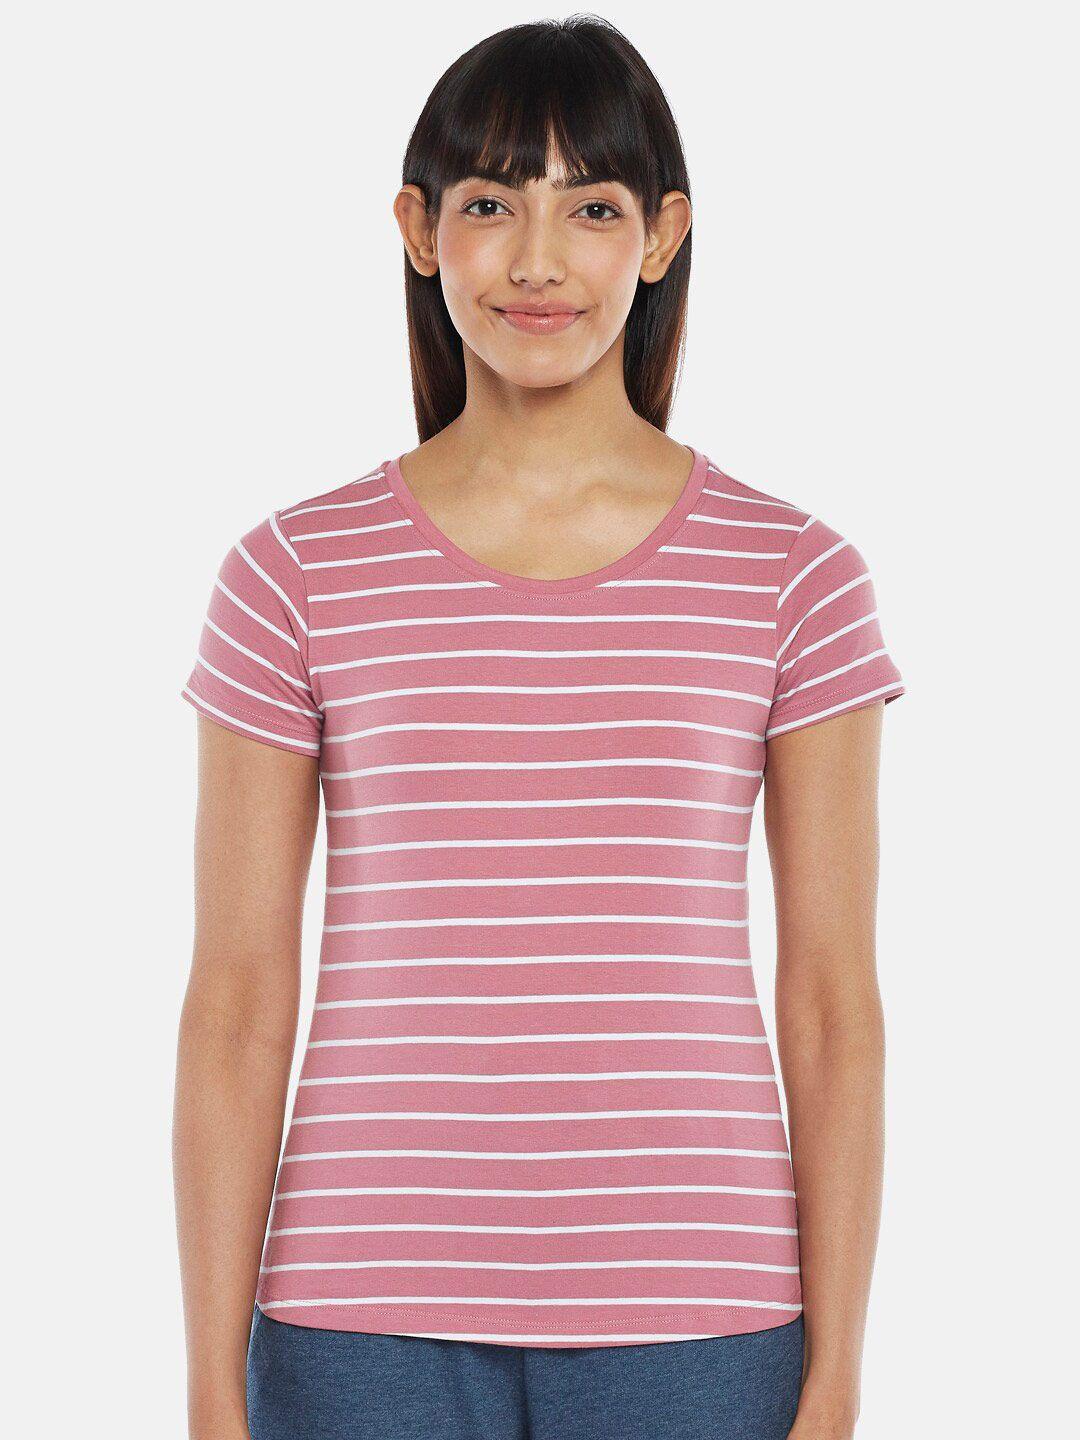 dreamz by pantaloons rose striped top